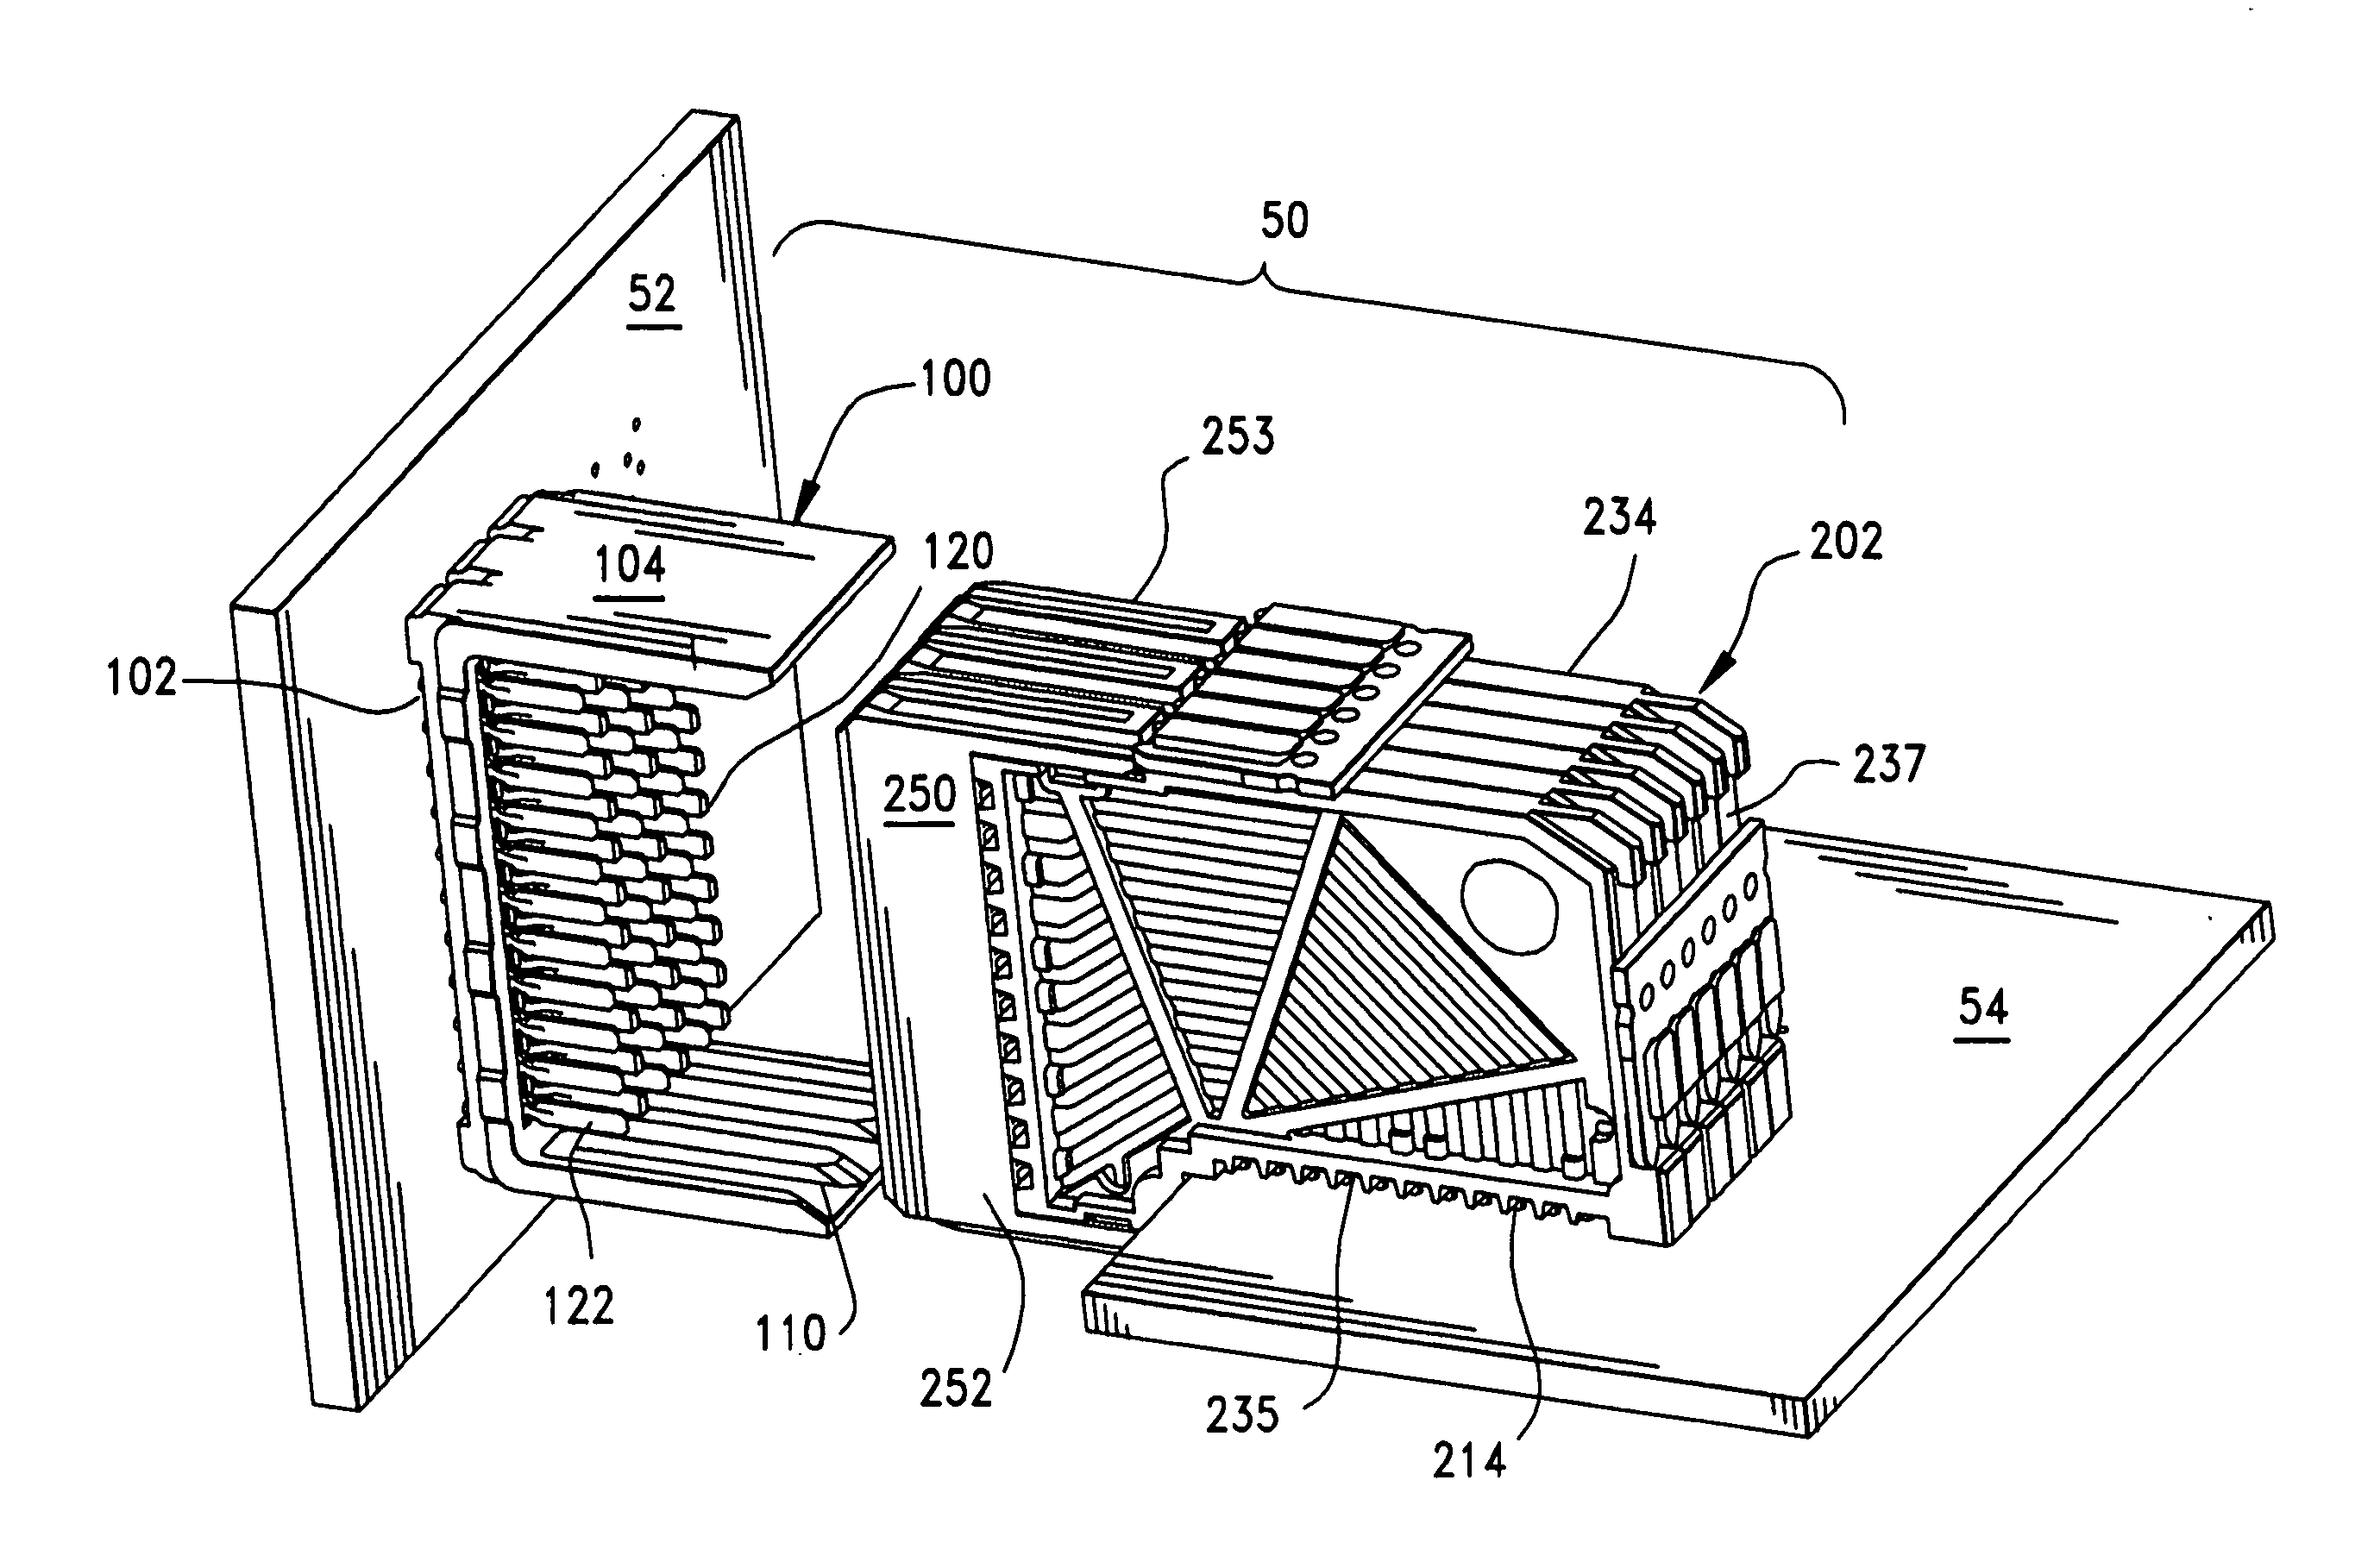 High-density, robust connector for stacking applications